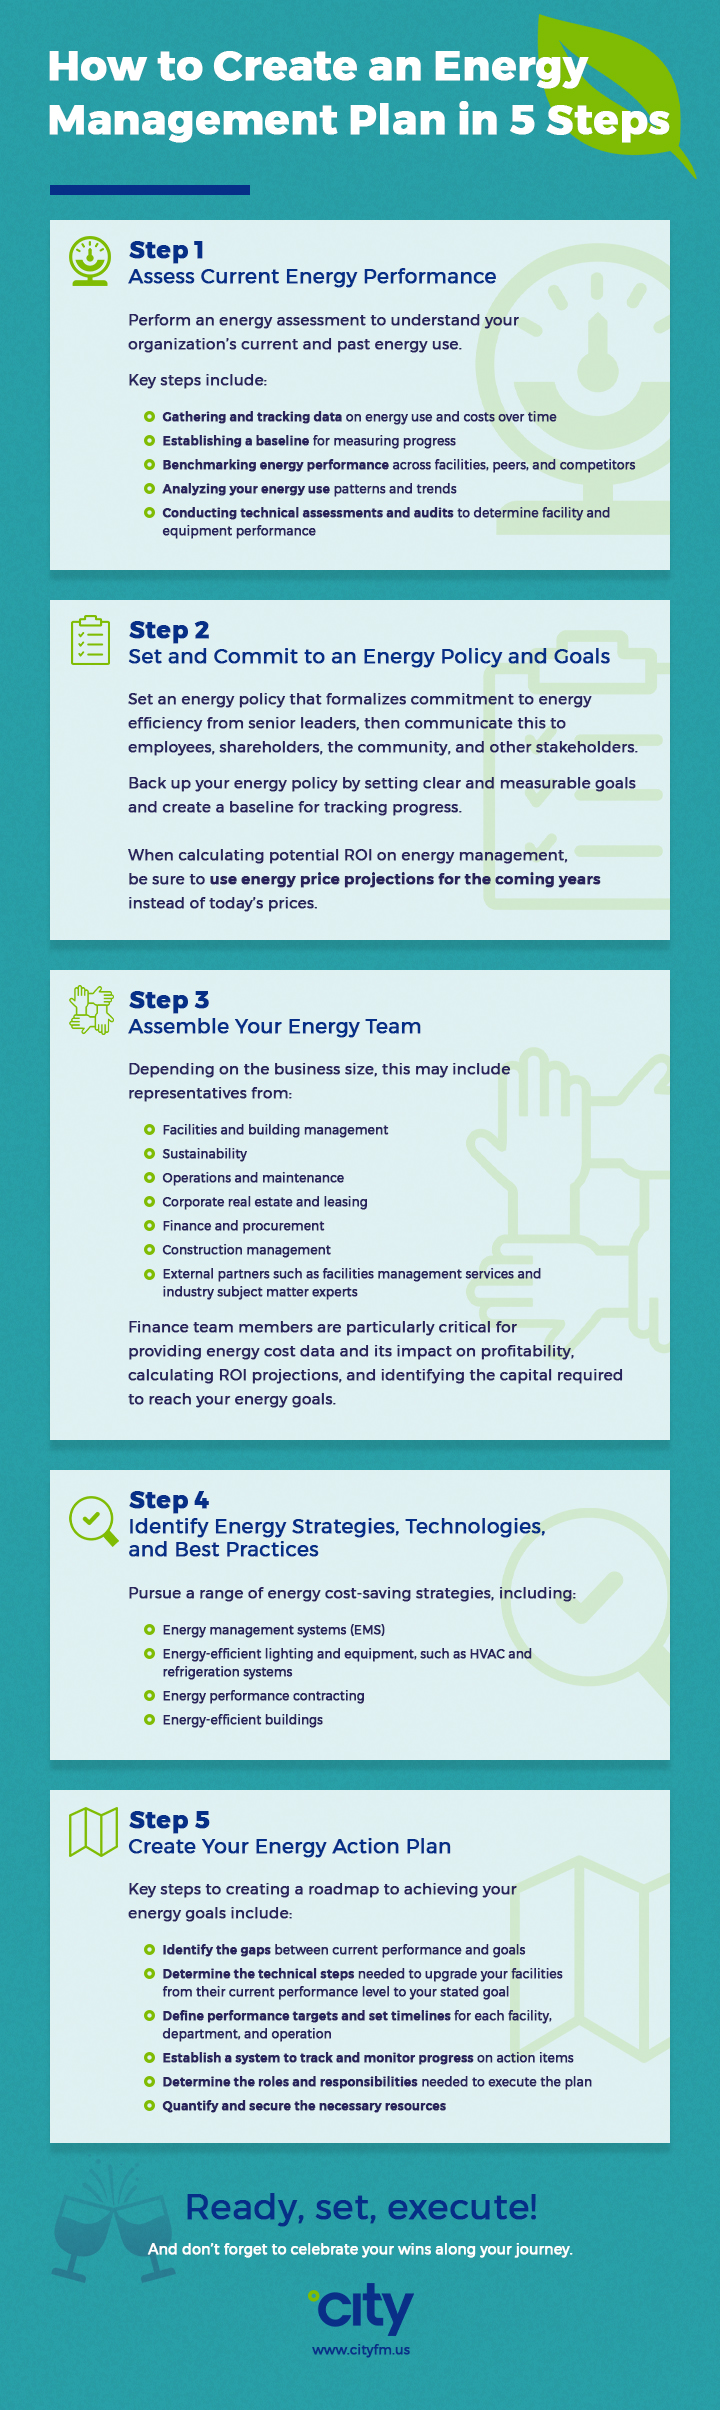 Energy management during competitions